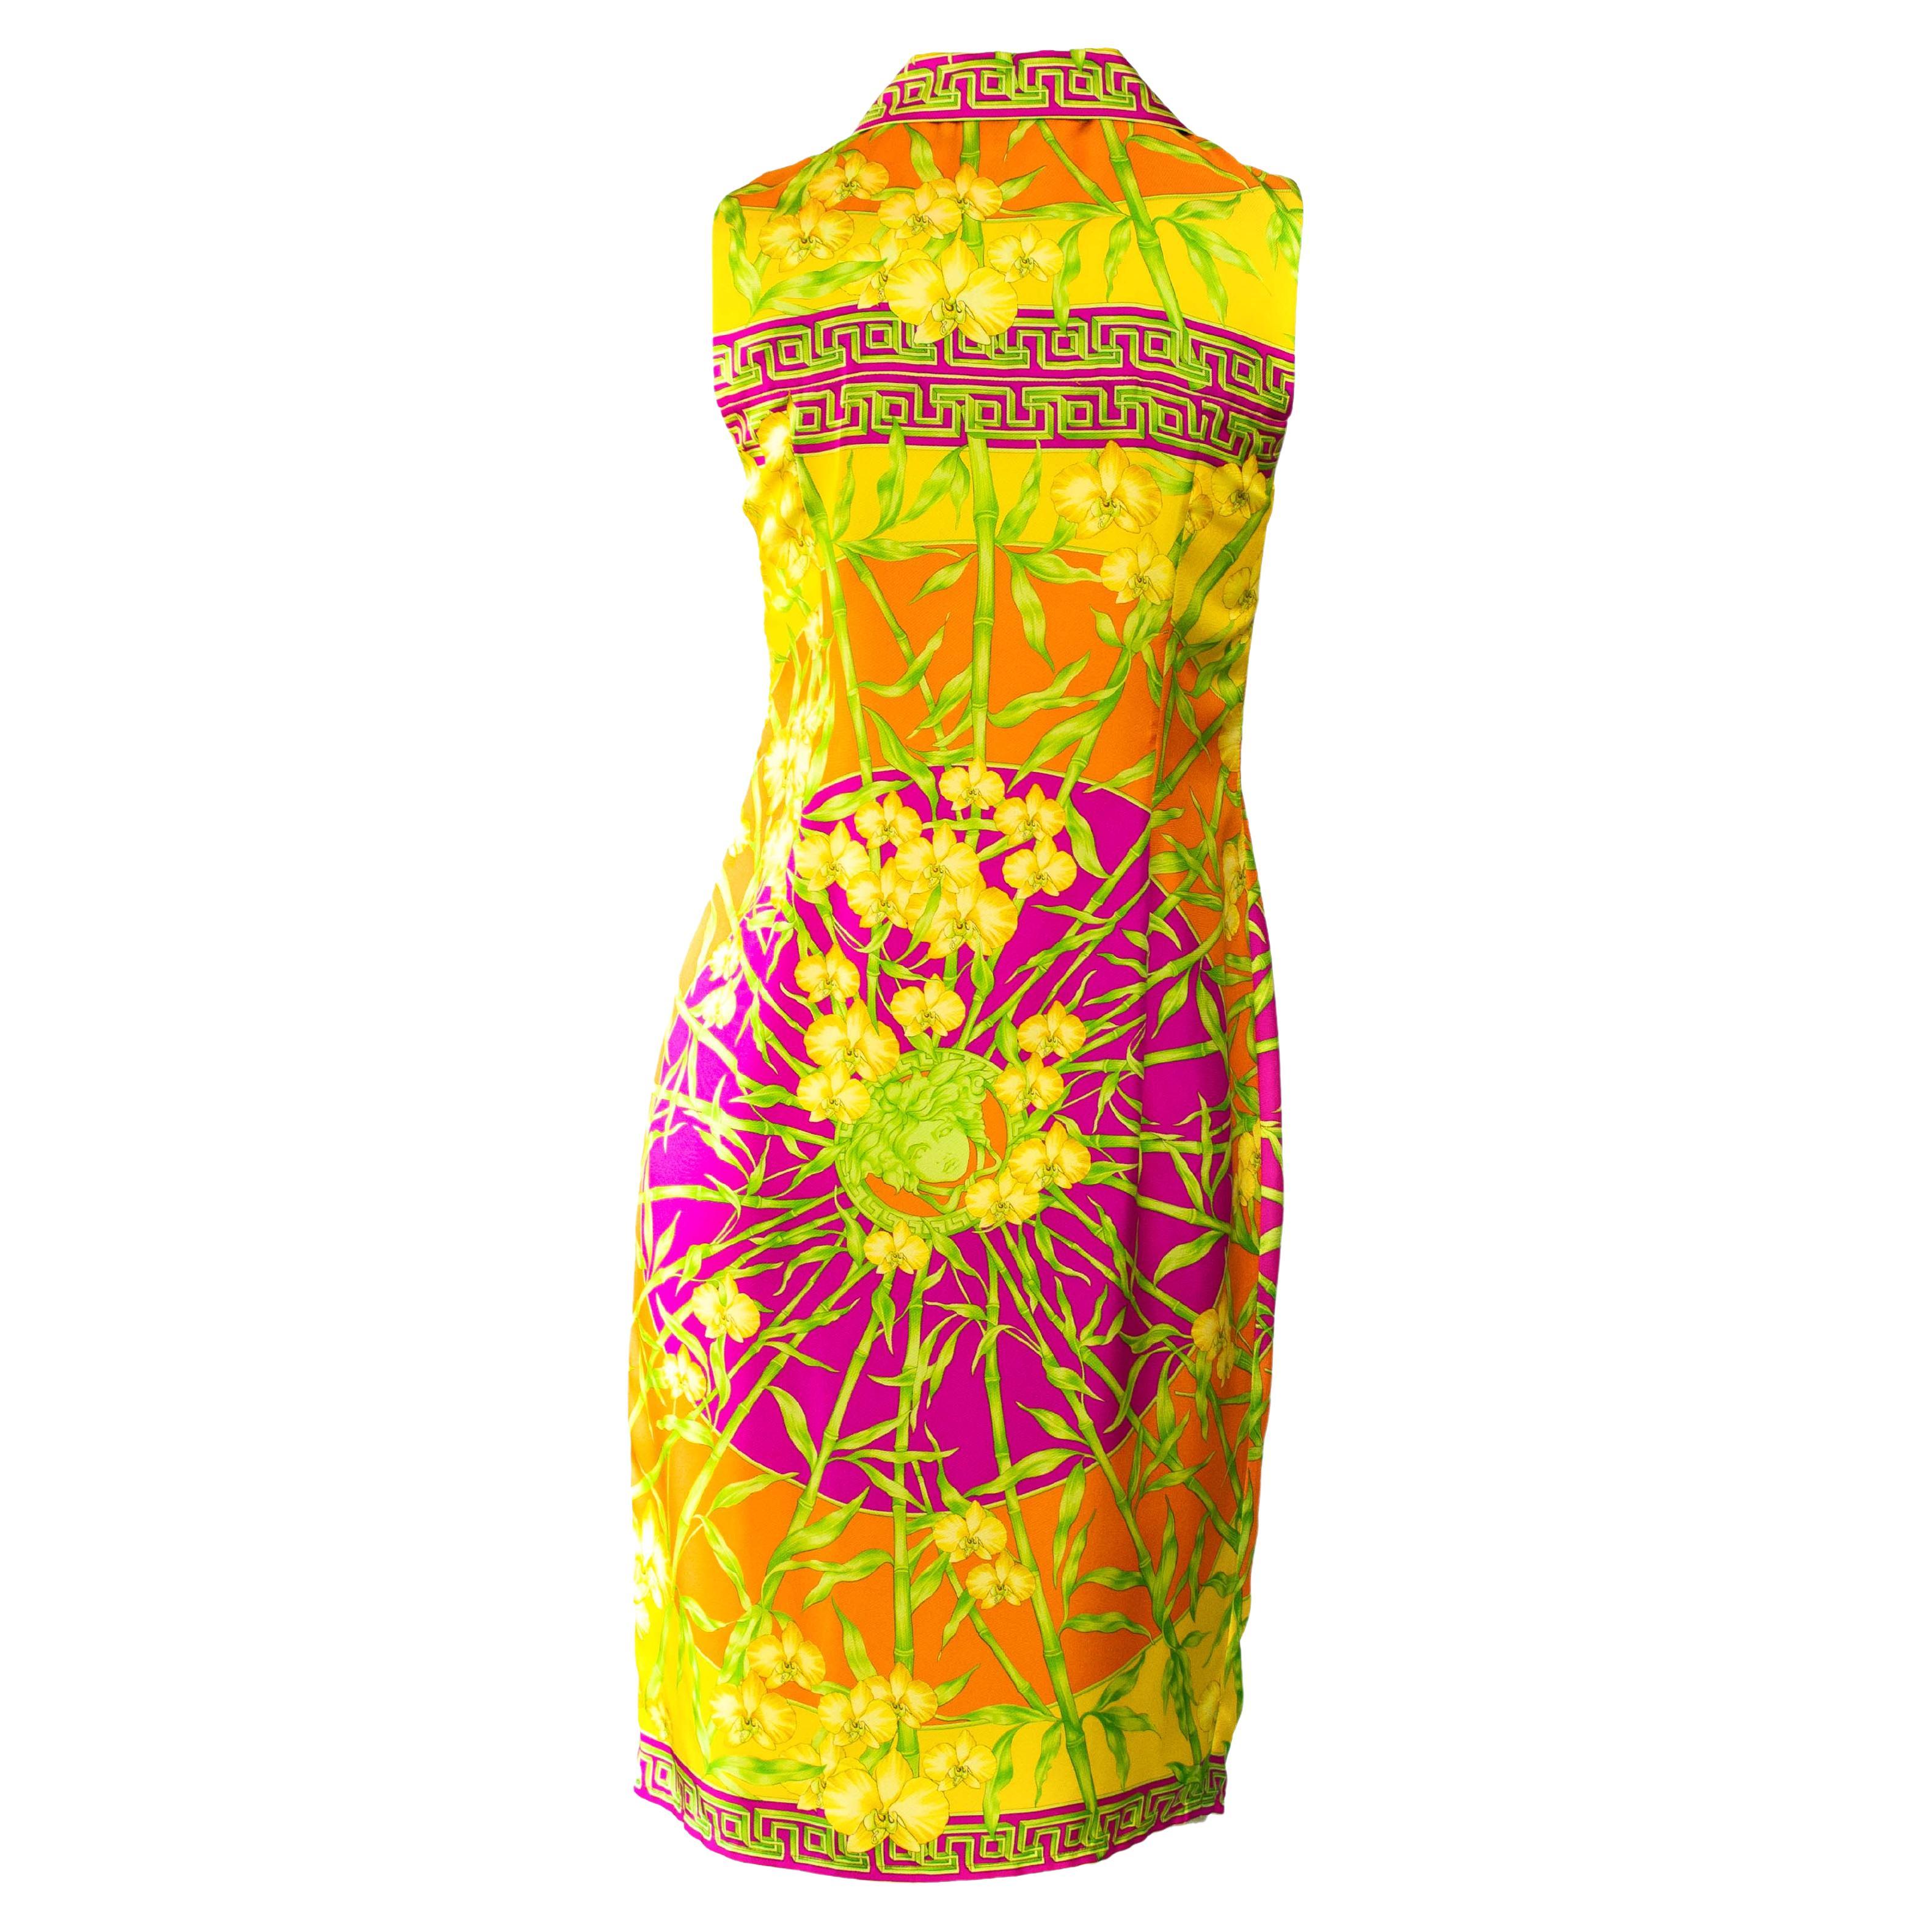 This Versace take on a collared 'ladies who lunch' dress was designed by Donatella Versace. This dress by Gianni Versace for the Spring/Summer 2000 collection and includes an orchid jungle motif, similar to Donatella's famous jungle print seen on